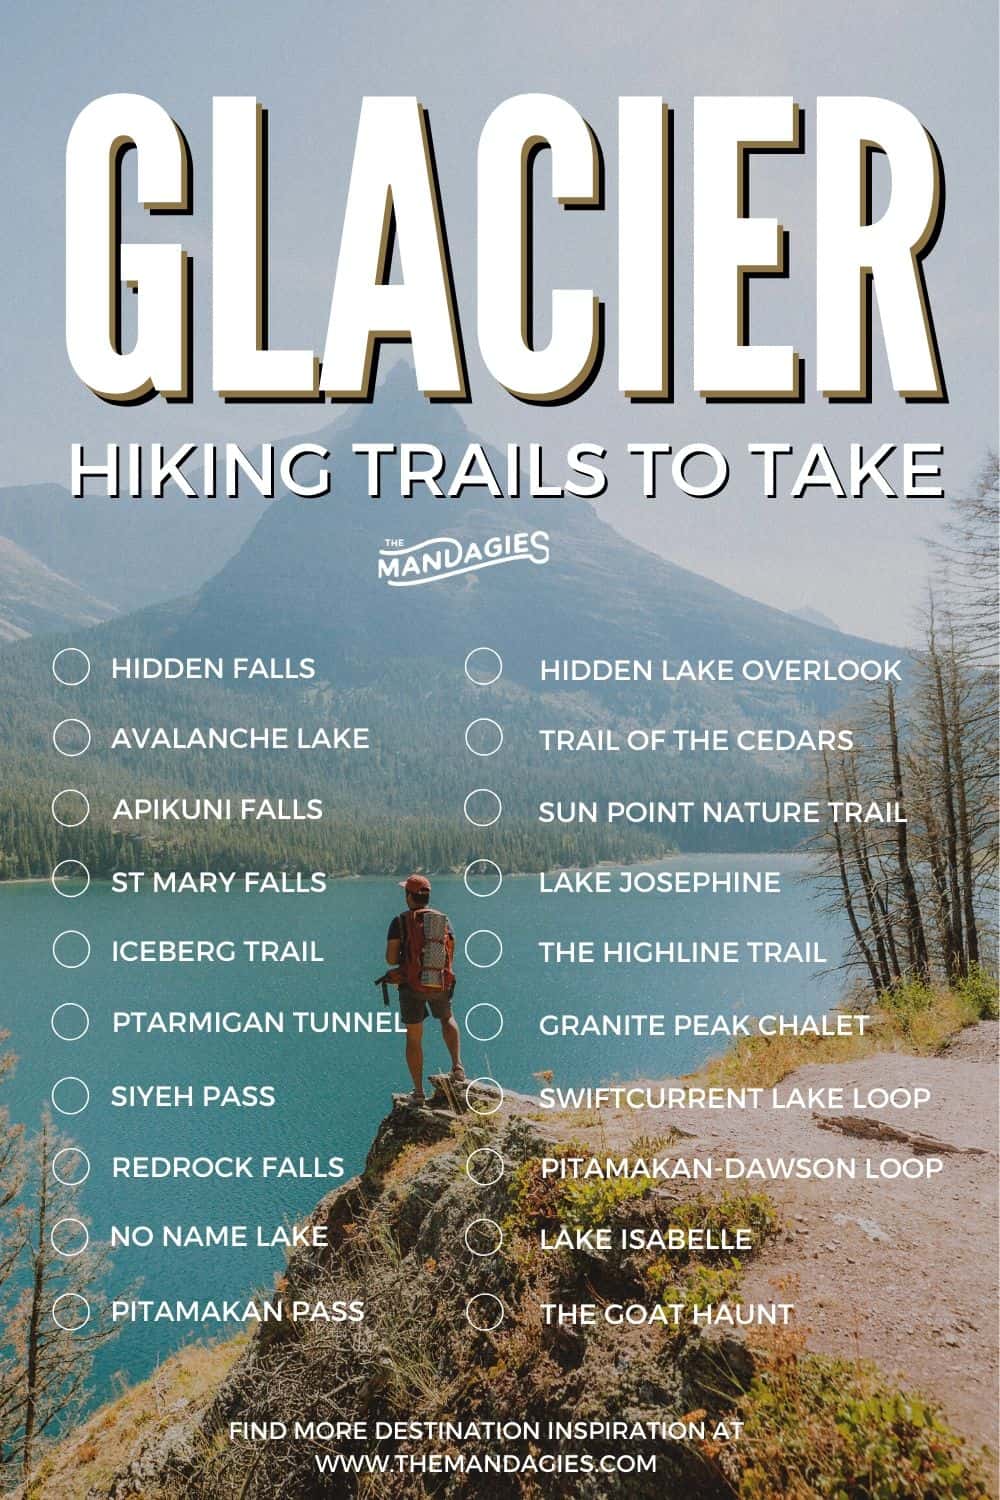 All The Best Hikes In Glacier National Park, Montana | Looking for some of the best hikesin Glacier National Park? In this post, we're sharing the best Glacier trails, including ones to glaciers, lakes, and waterfalls! | Hike In Glacier National Park | Trails In Glacier | Visit Montana | Montana Road Trips #montana #glaciernationalpark #GlacierHikes #glaciermontana #montanaroadtrip #roadtrip #rockymountains #USA #summer #adventure